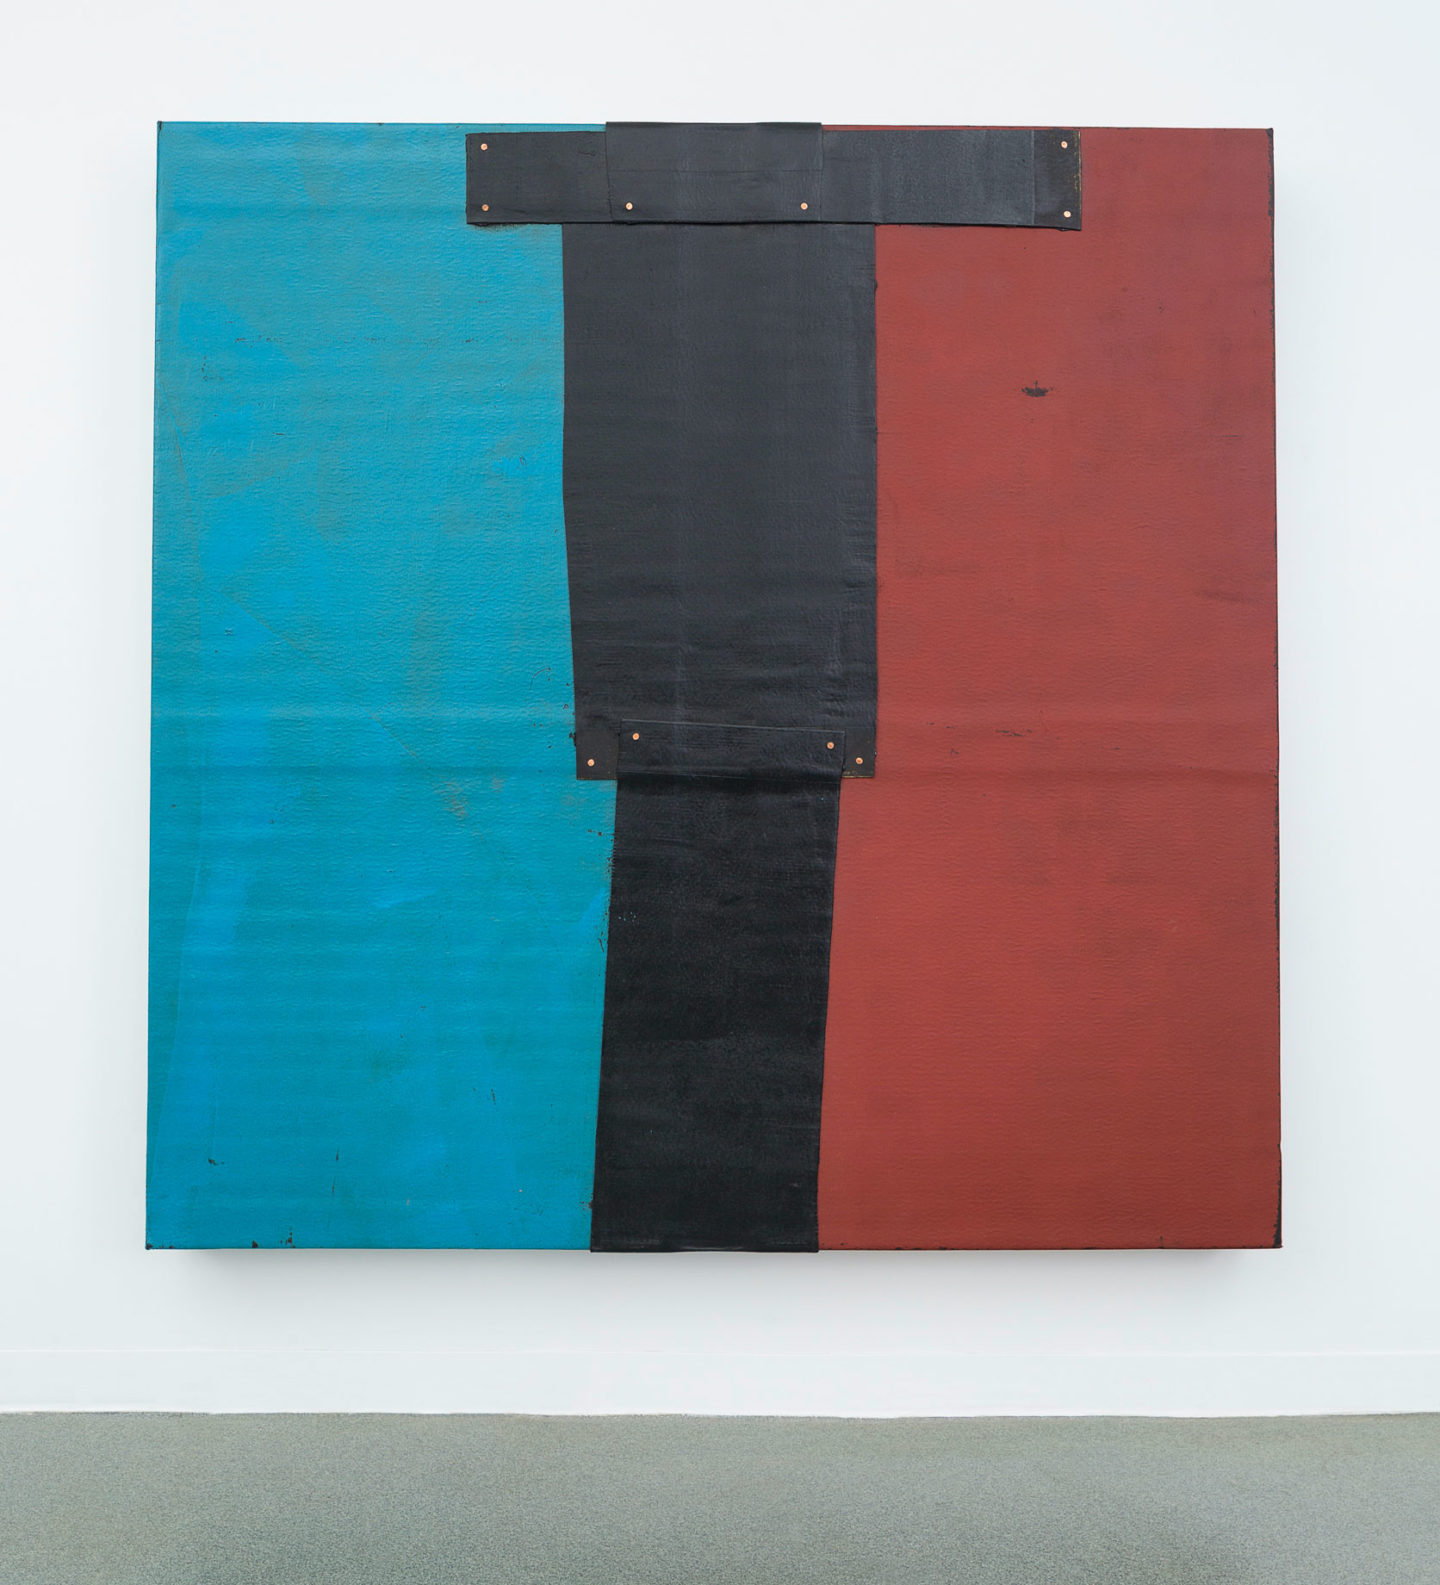 THEASTER GATES
Flag Sketch, 2020
Industrial oil-based enamel, rubber torch down, bitumen, wood, and copper
72 x 72 inches / 182.9 x 182.9 cm (unframed)  
© Theaster Gates. Photo: Jacob Hand. Courtesy Gagosian